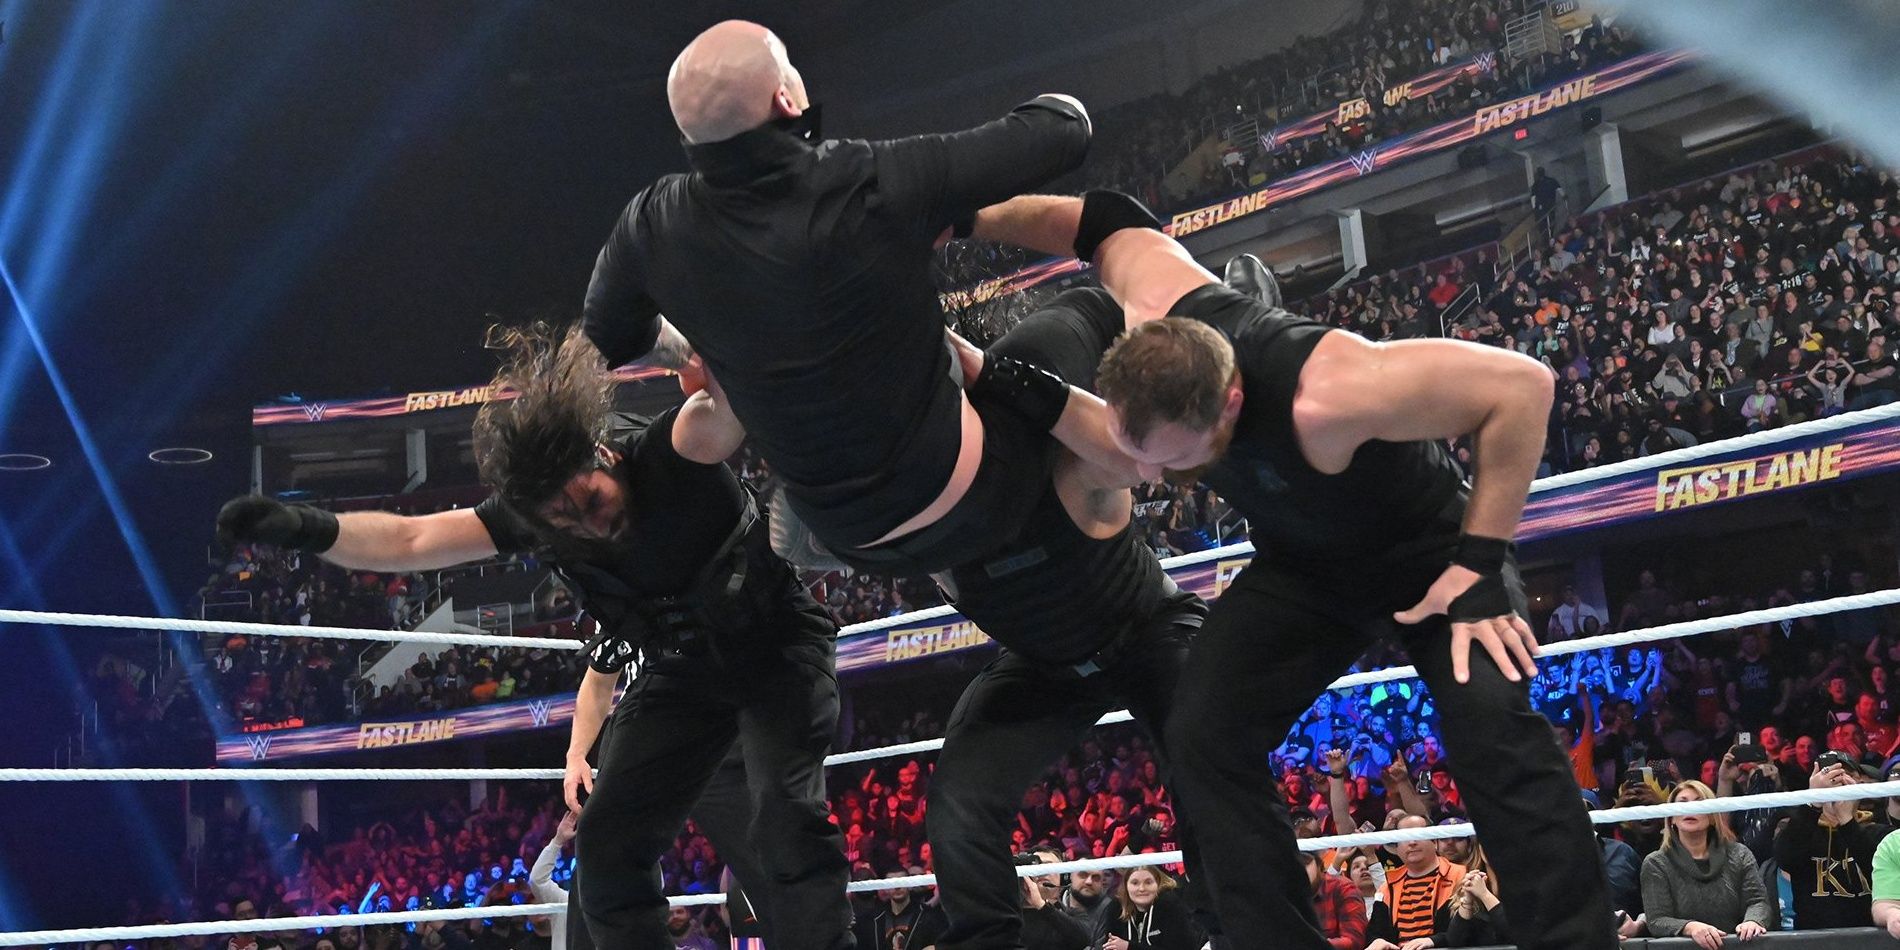 The Shield compete at Fastlane Cropped